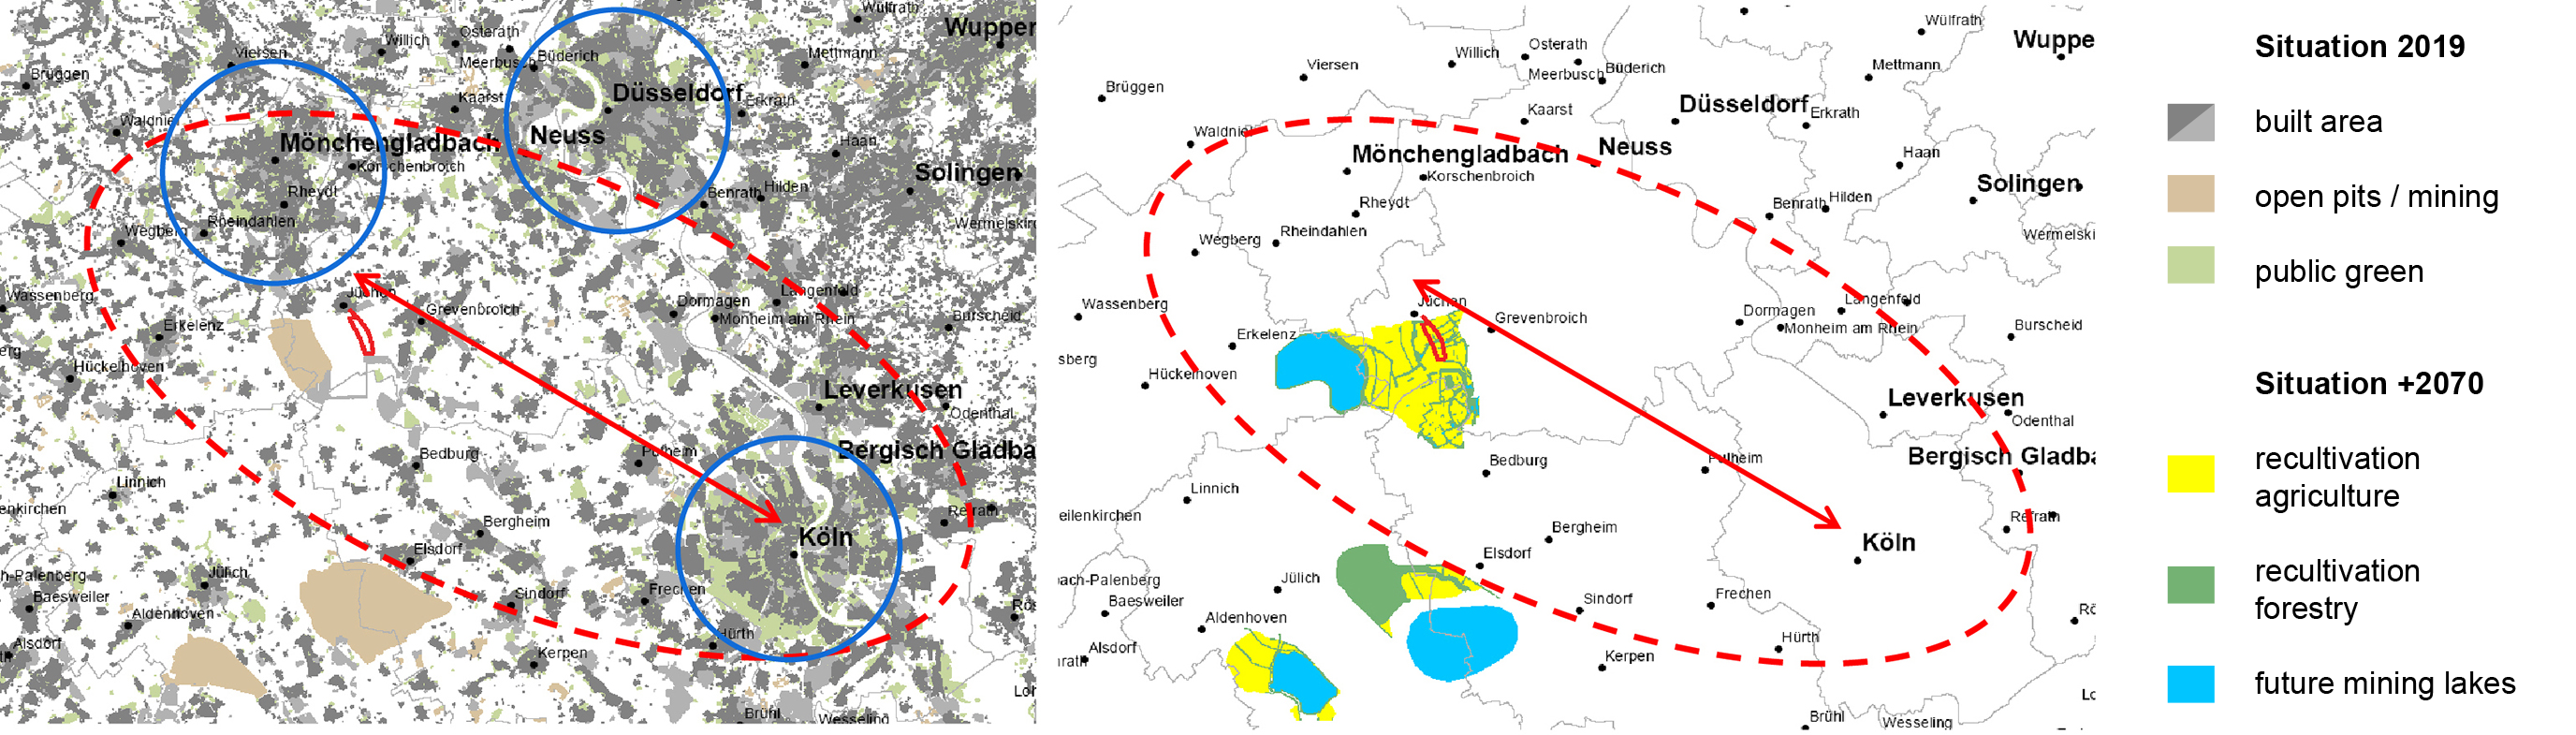 Image (left) showing a map with built area, open pits, public green and roughly the project area marked in red color. Image (right) showing the same extend, yet with agriculture and forestry recultivation areas and mining lakes in the future after the year 2070.